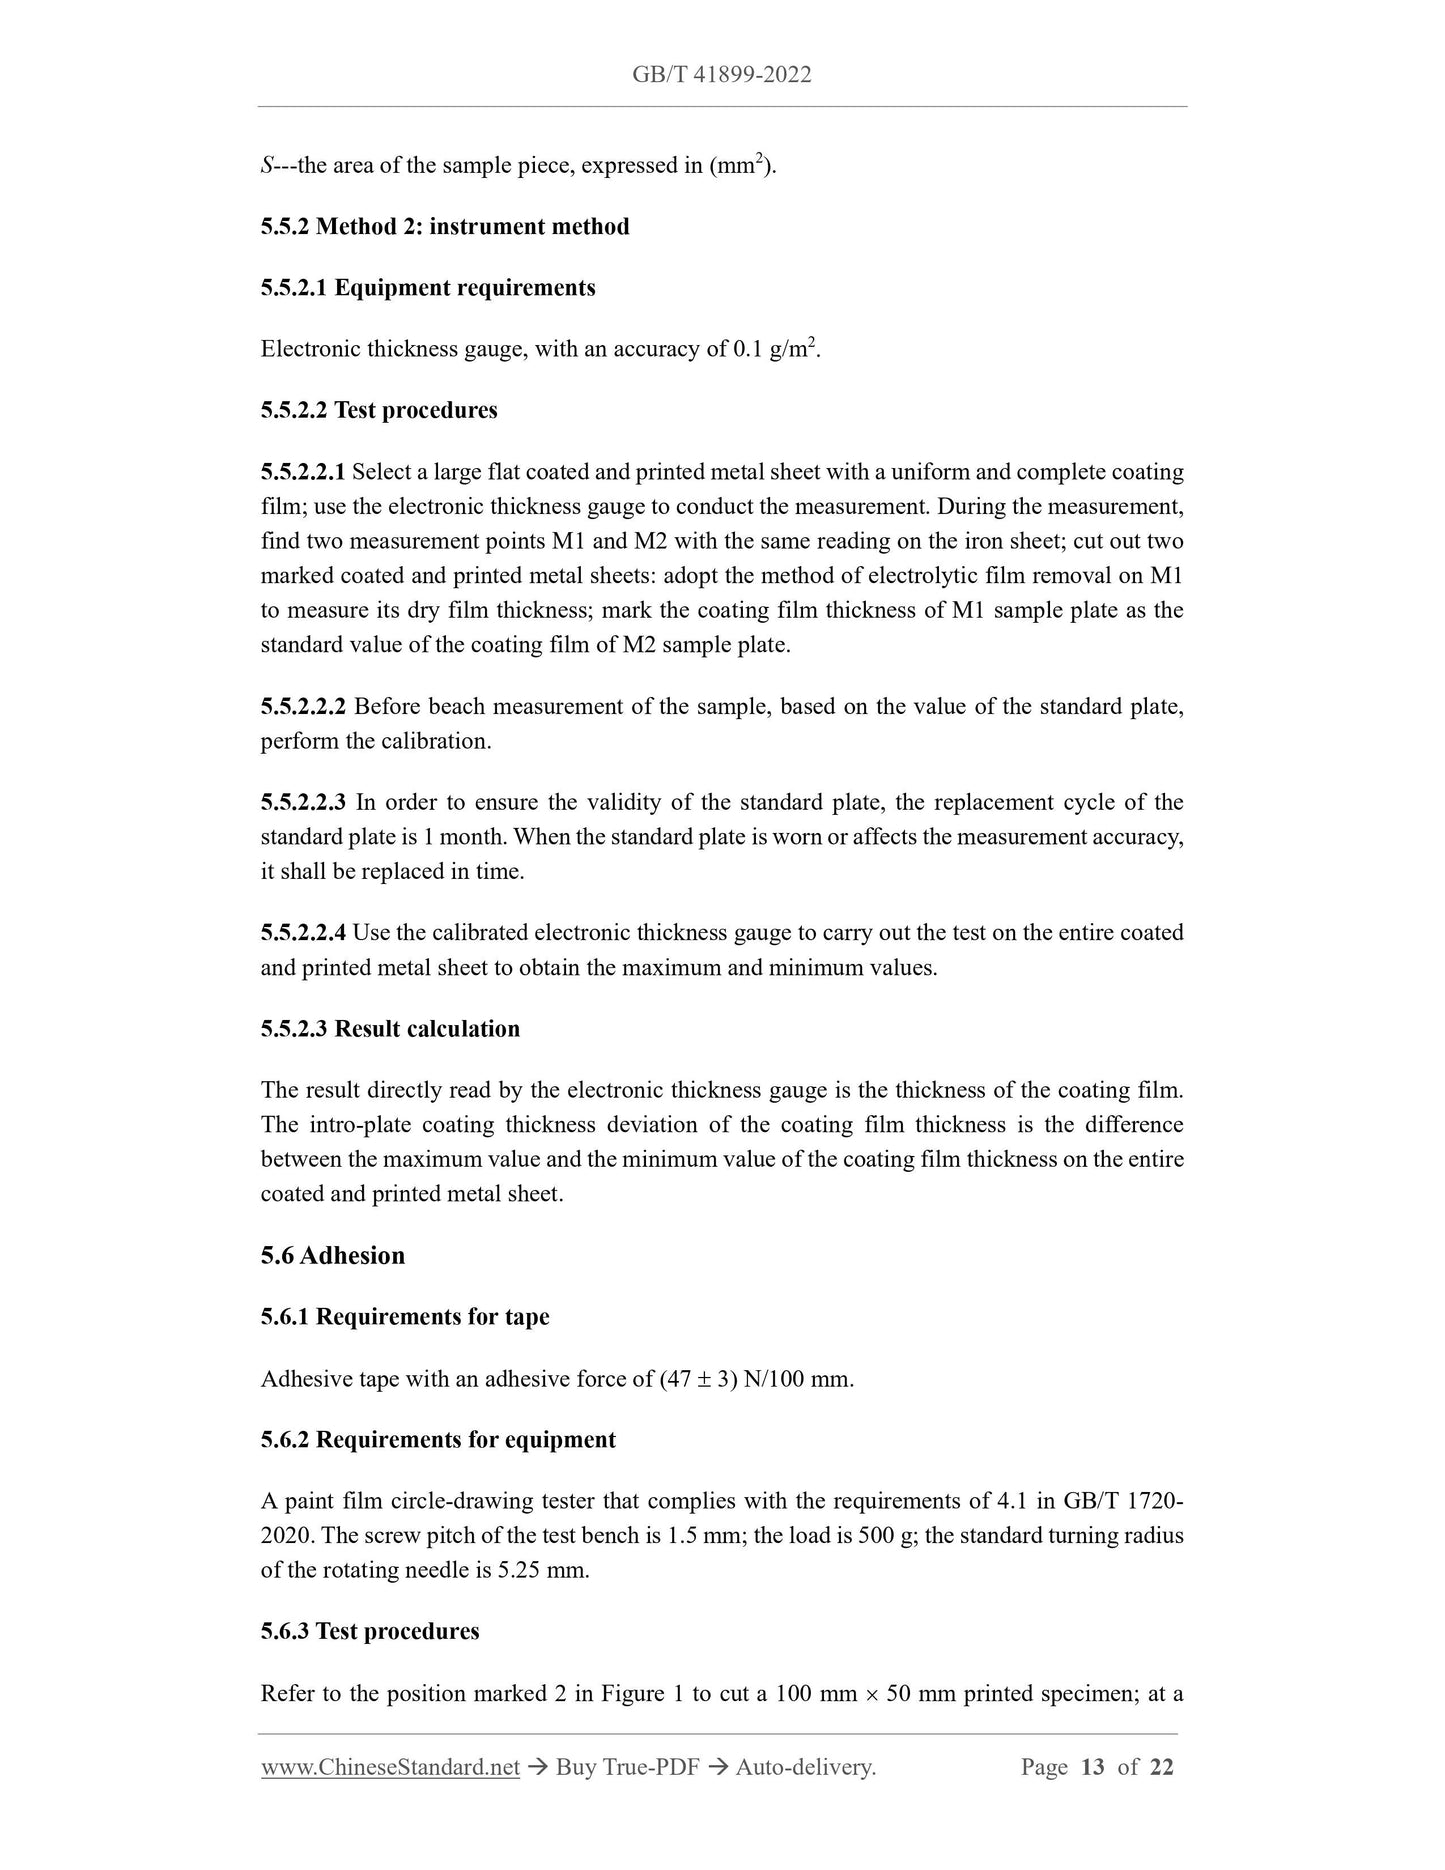 GB/T 41899-2022 Page 6